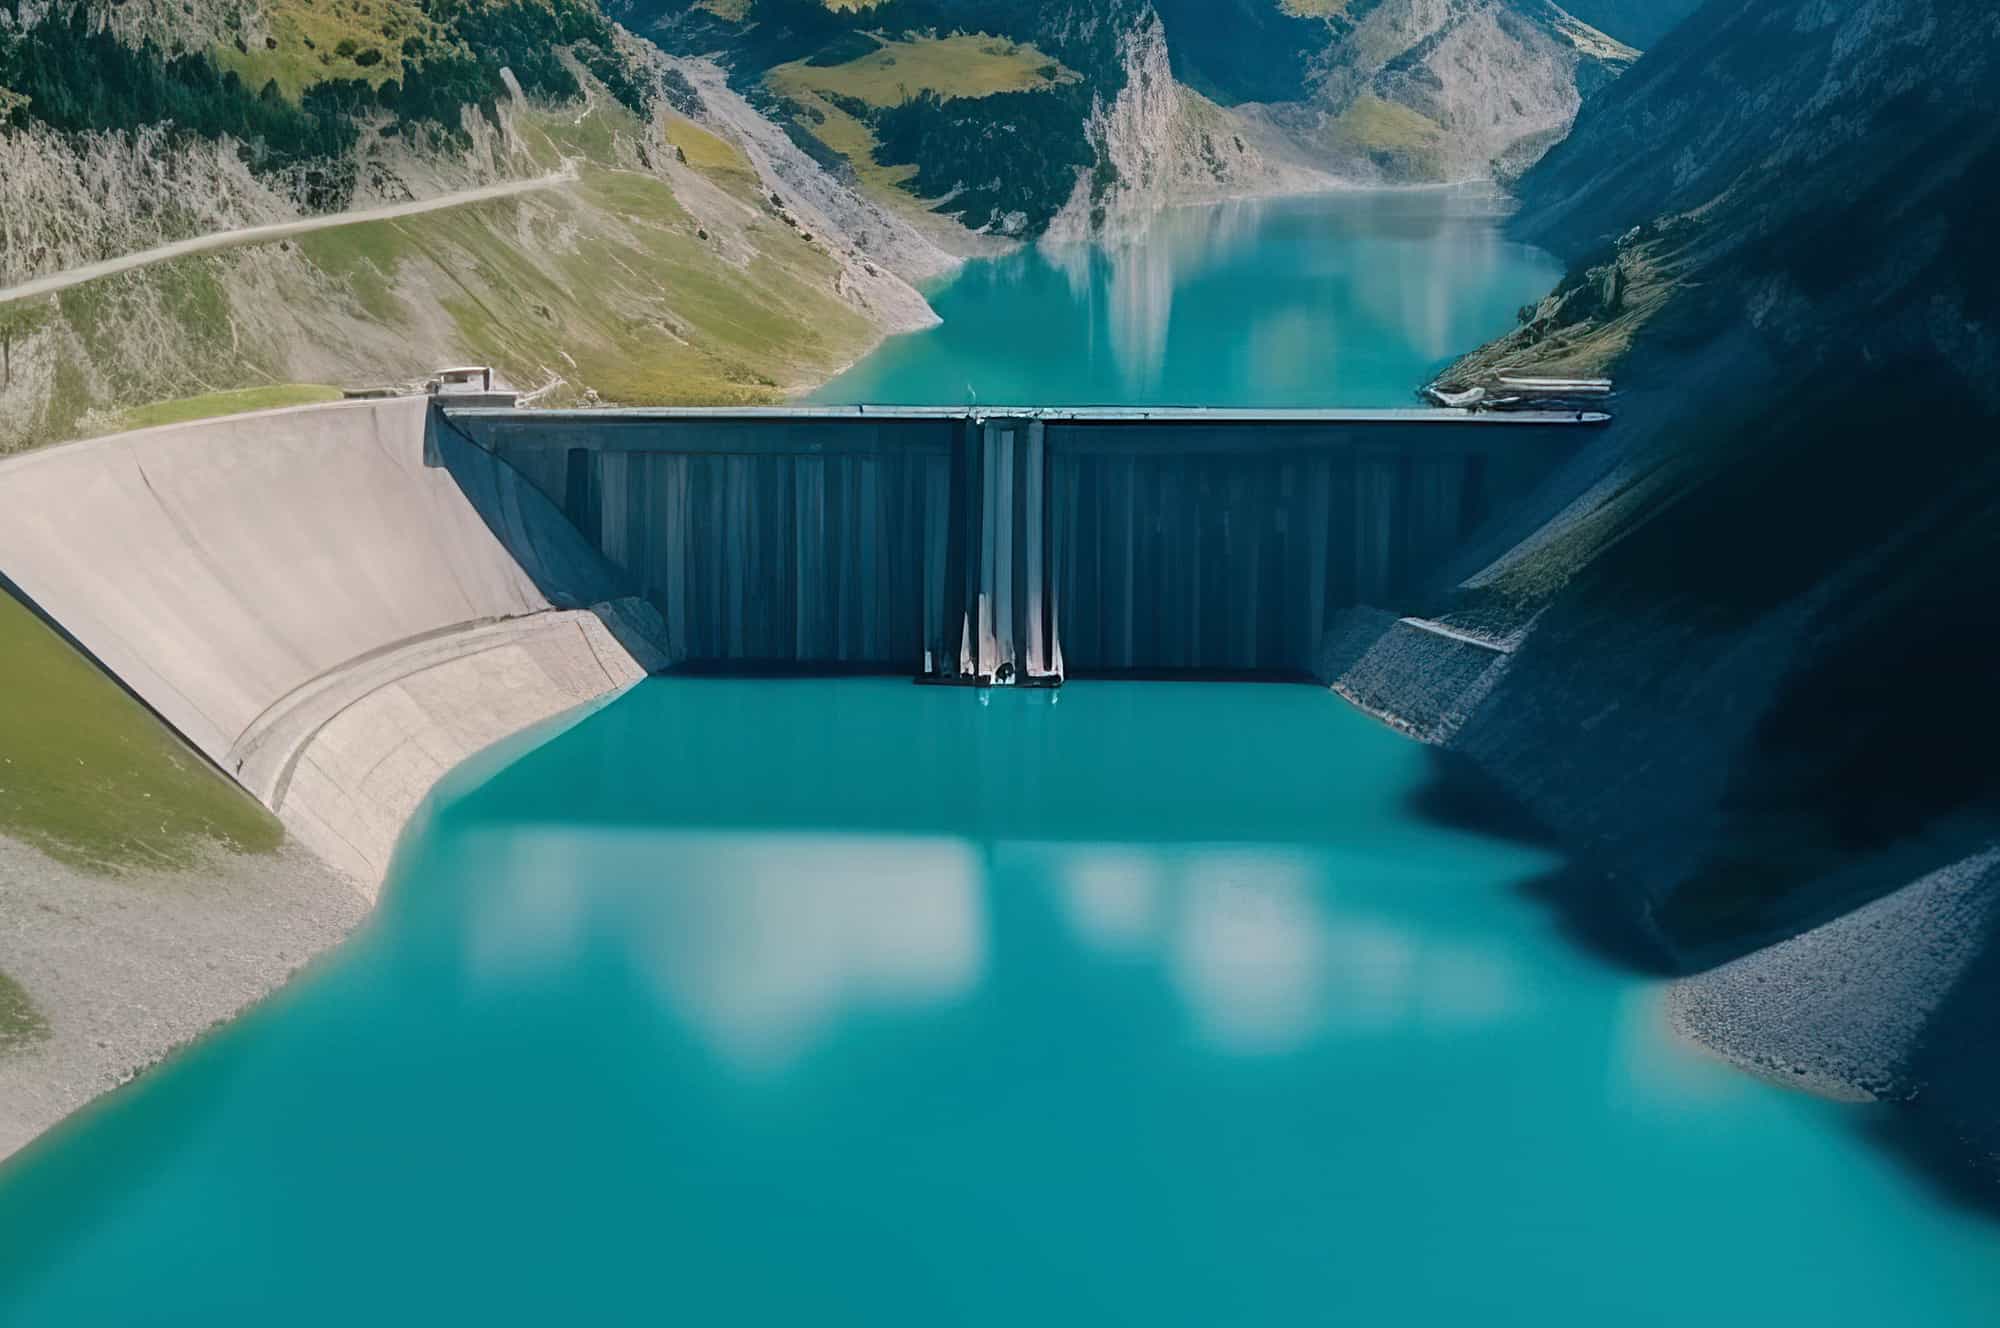 Aerial view of a large dam with a reservoir filled with turquoise water.